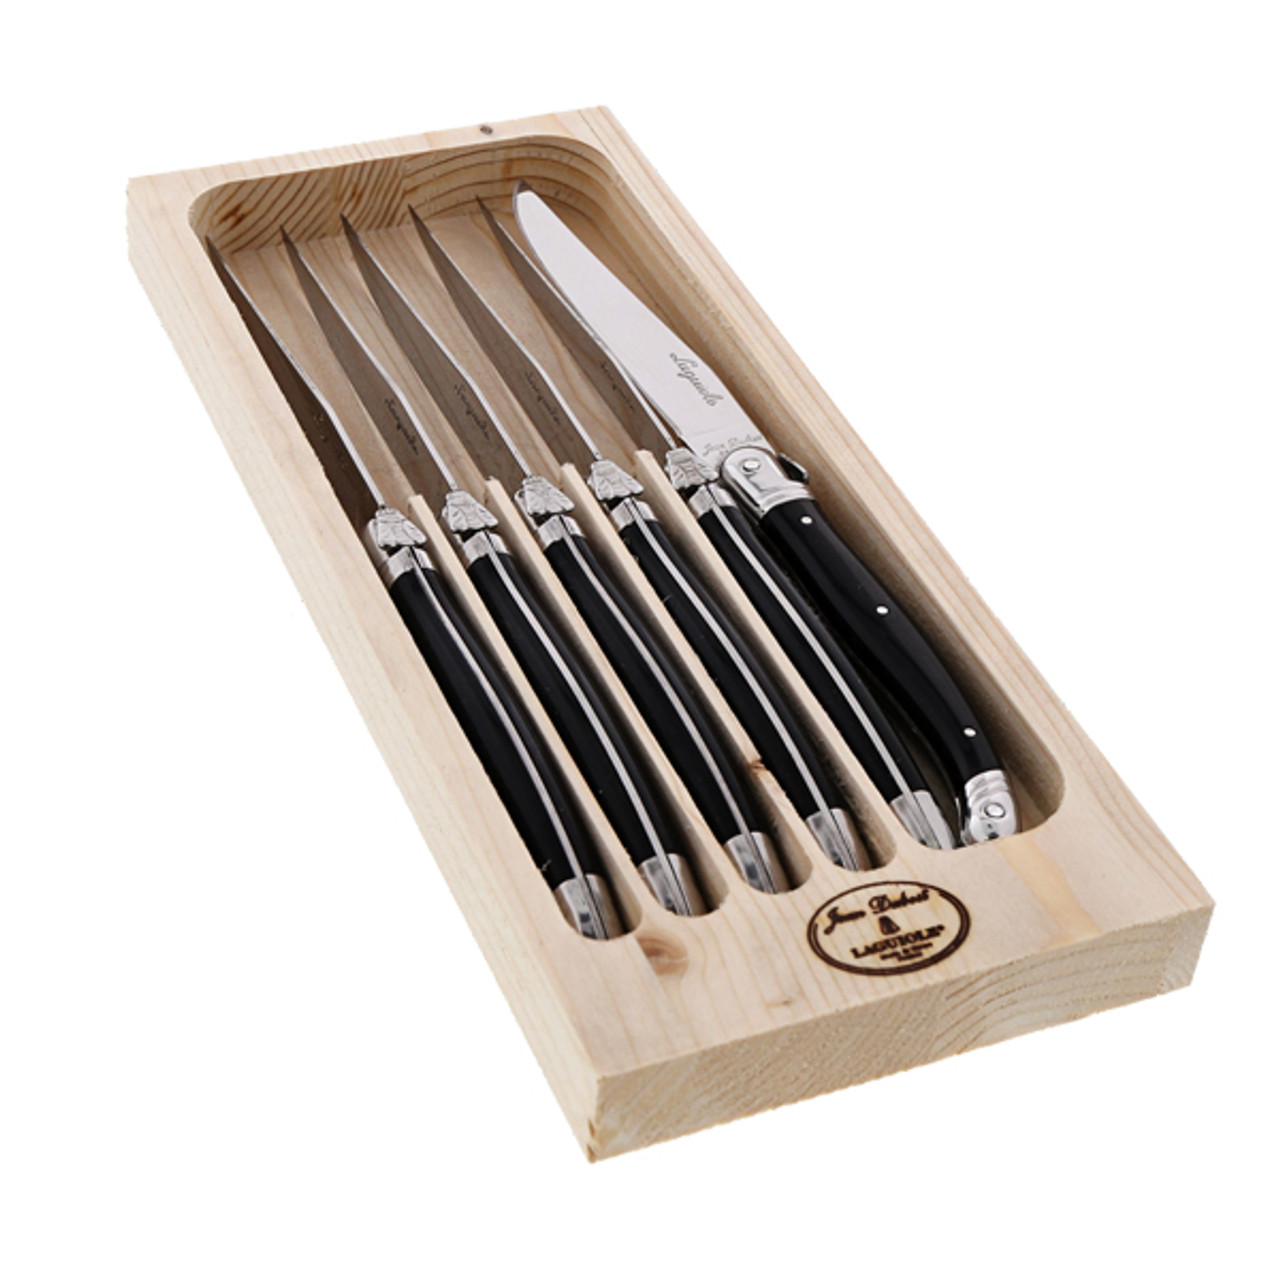 Jean Dubost 6 Steak Knives with Black Handles in Tray